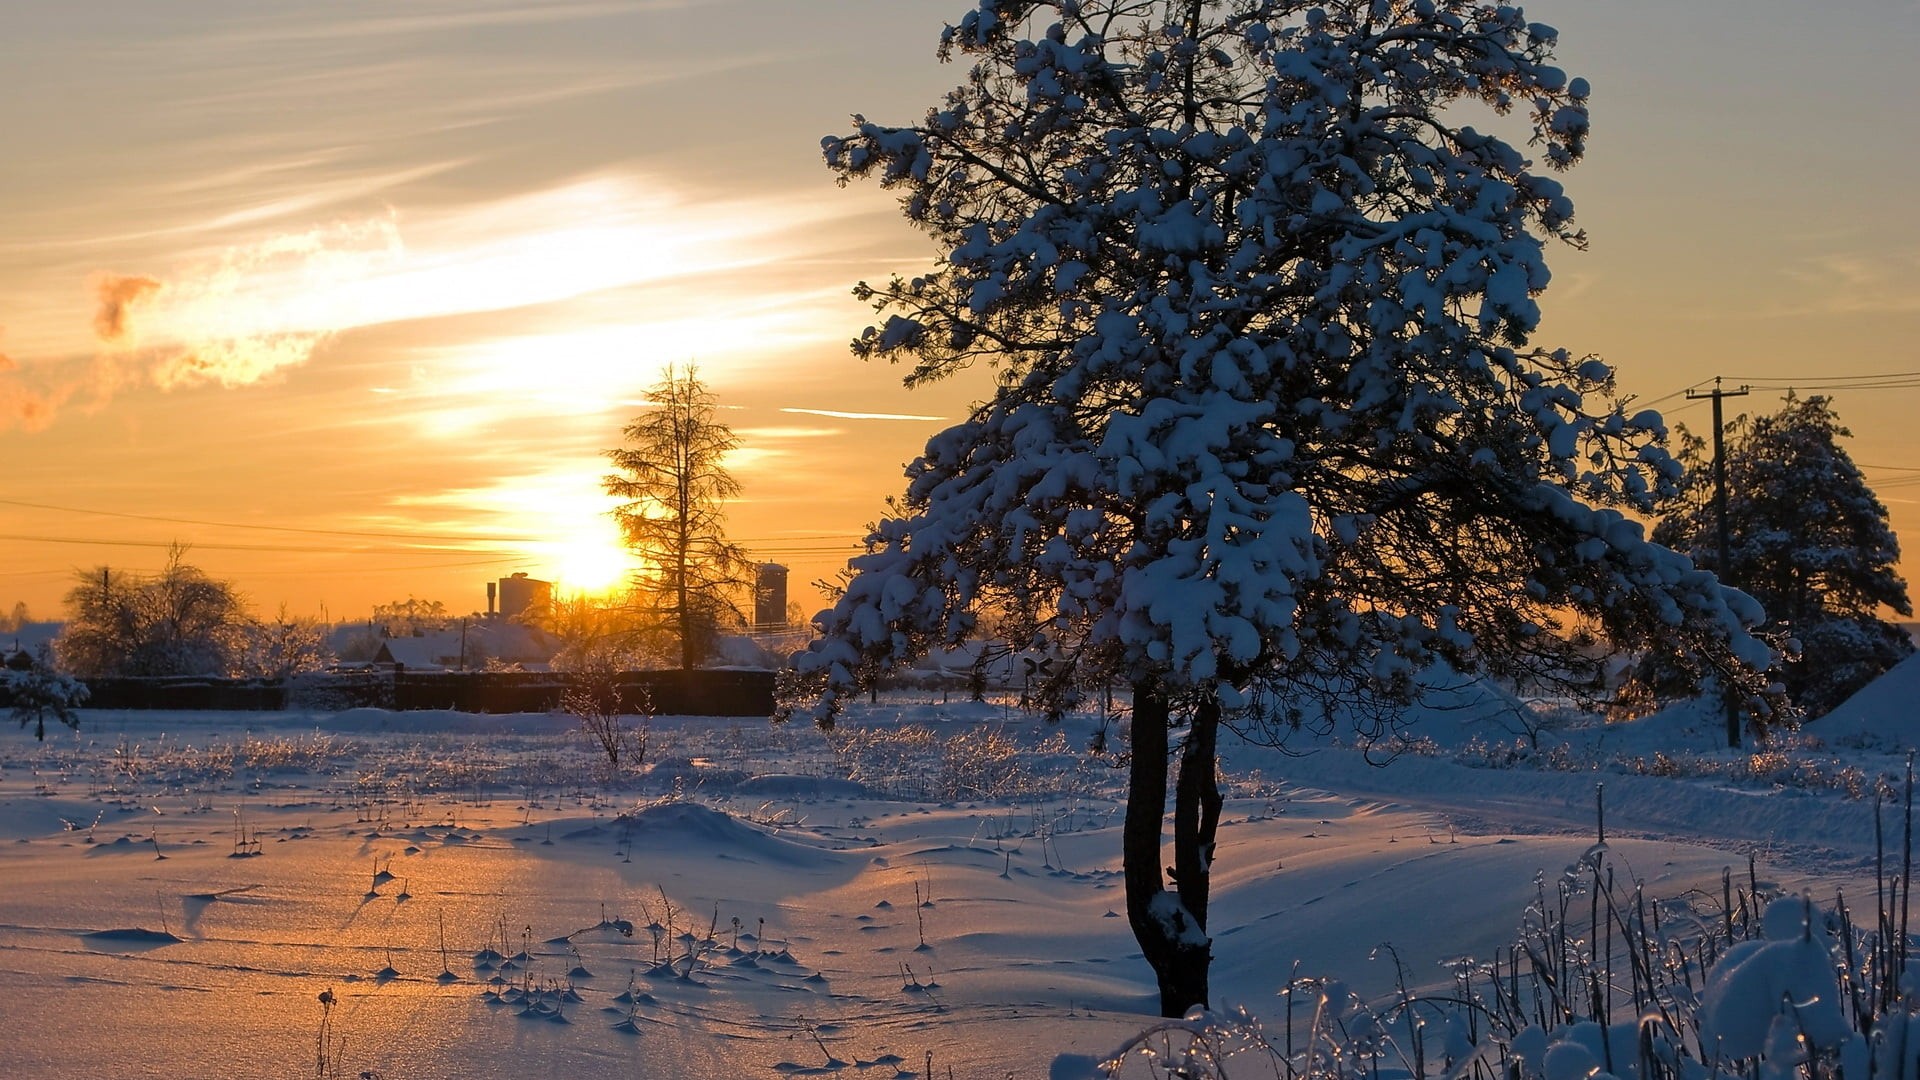 Winter Tree At Sunset Hd Wallpapers And Images New - Wallpaper - HD Wallpaper 